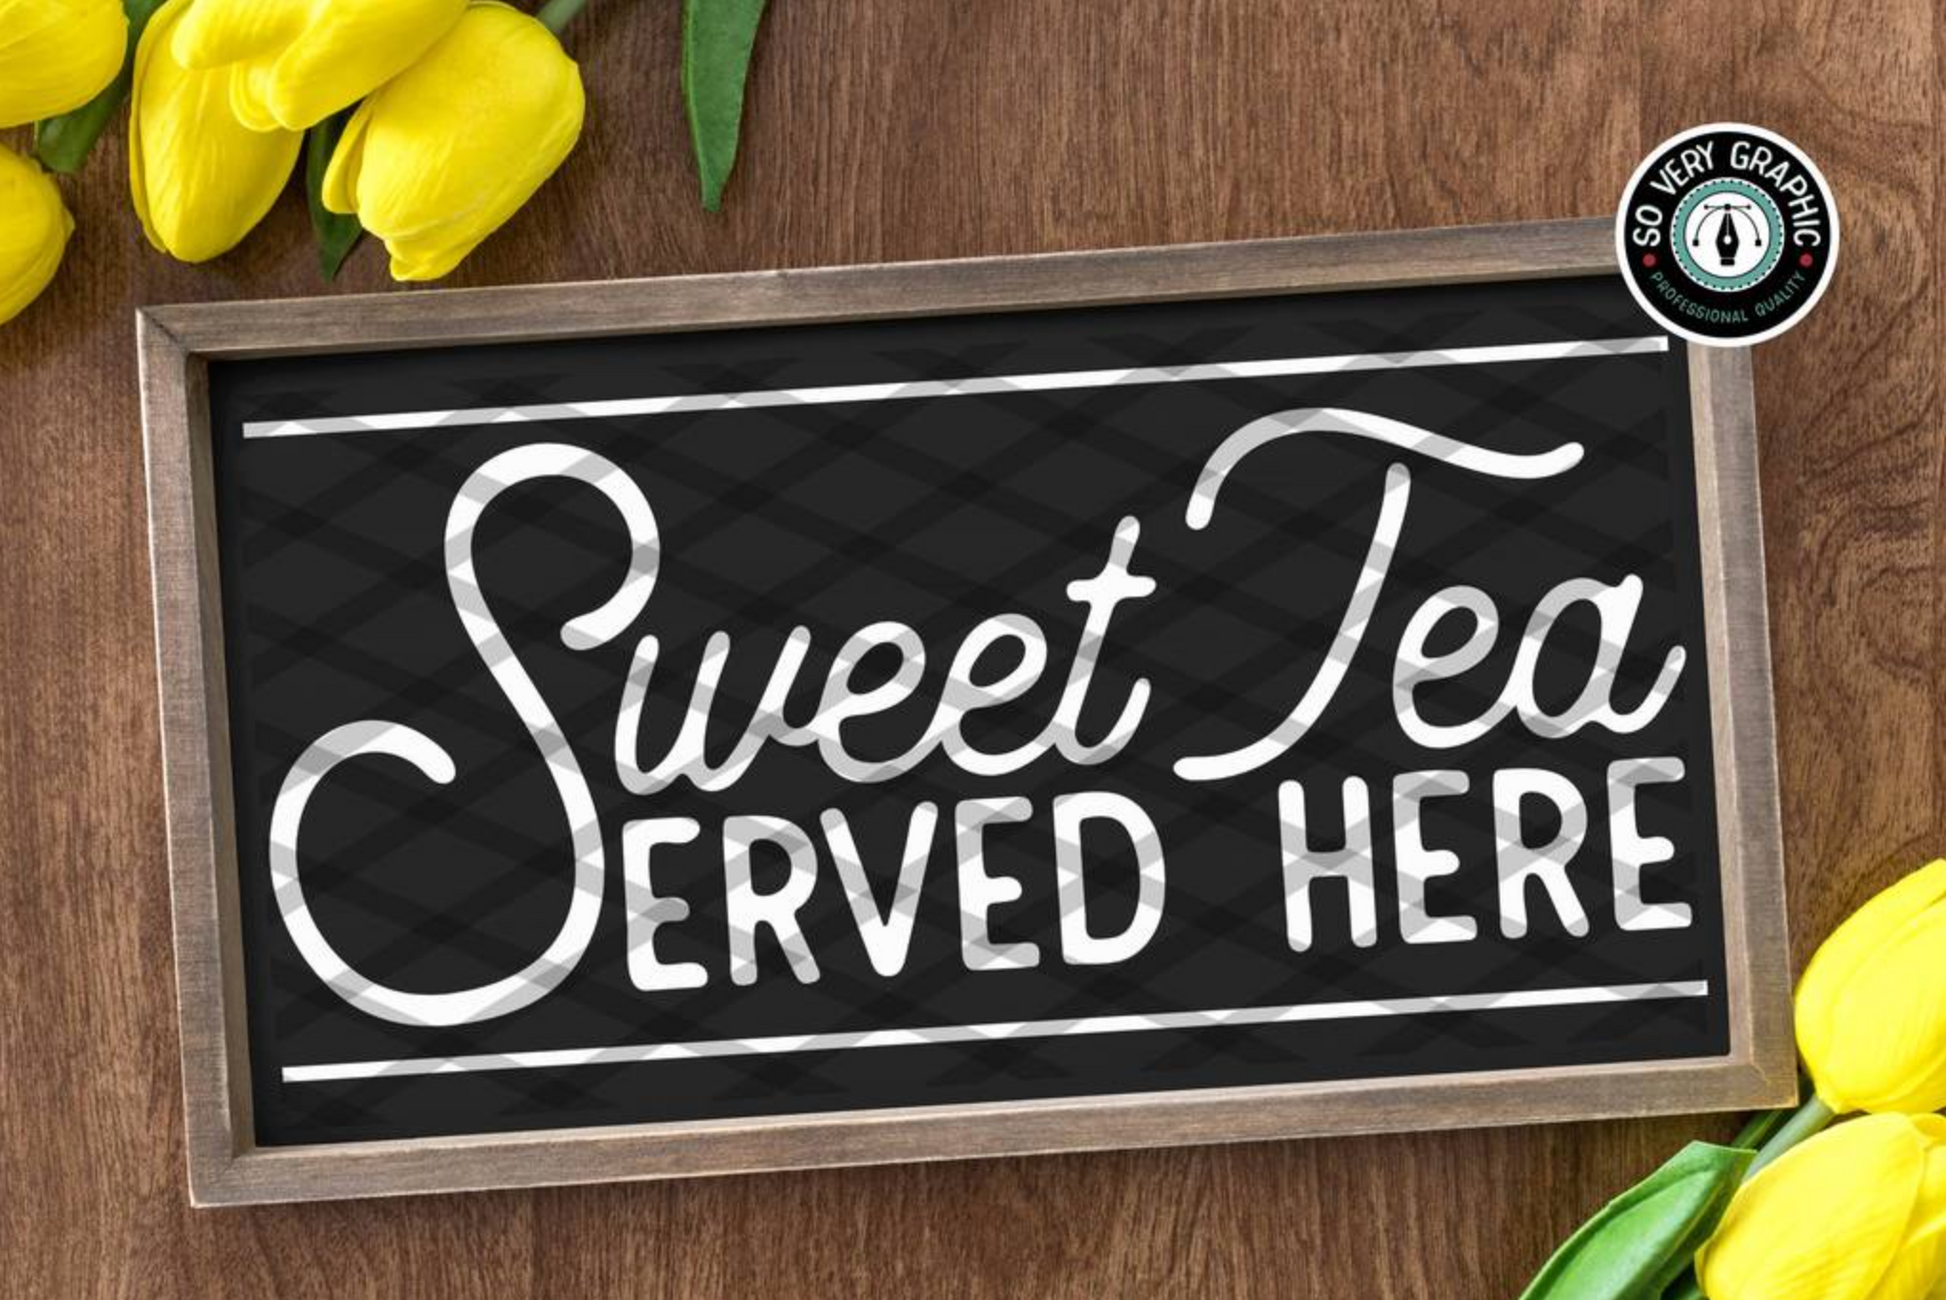 Sweet Tea Served Here Farmhouse Kitchen SVG Cut File for Cricut, Silhouette & ScanNCut machines. Professionally Made Designs for hobby craft & small business use from So Very Graphic. Instant Digital Download includes SVG, DXF & PNG formats.